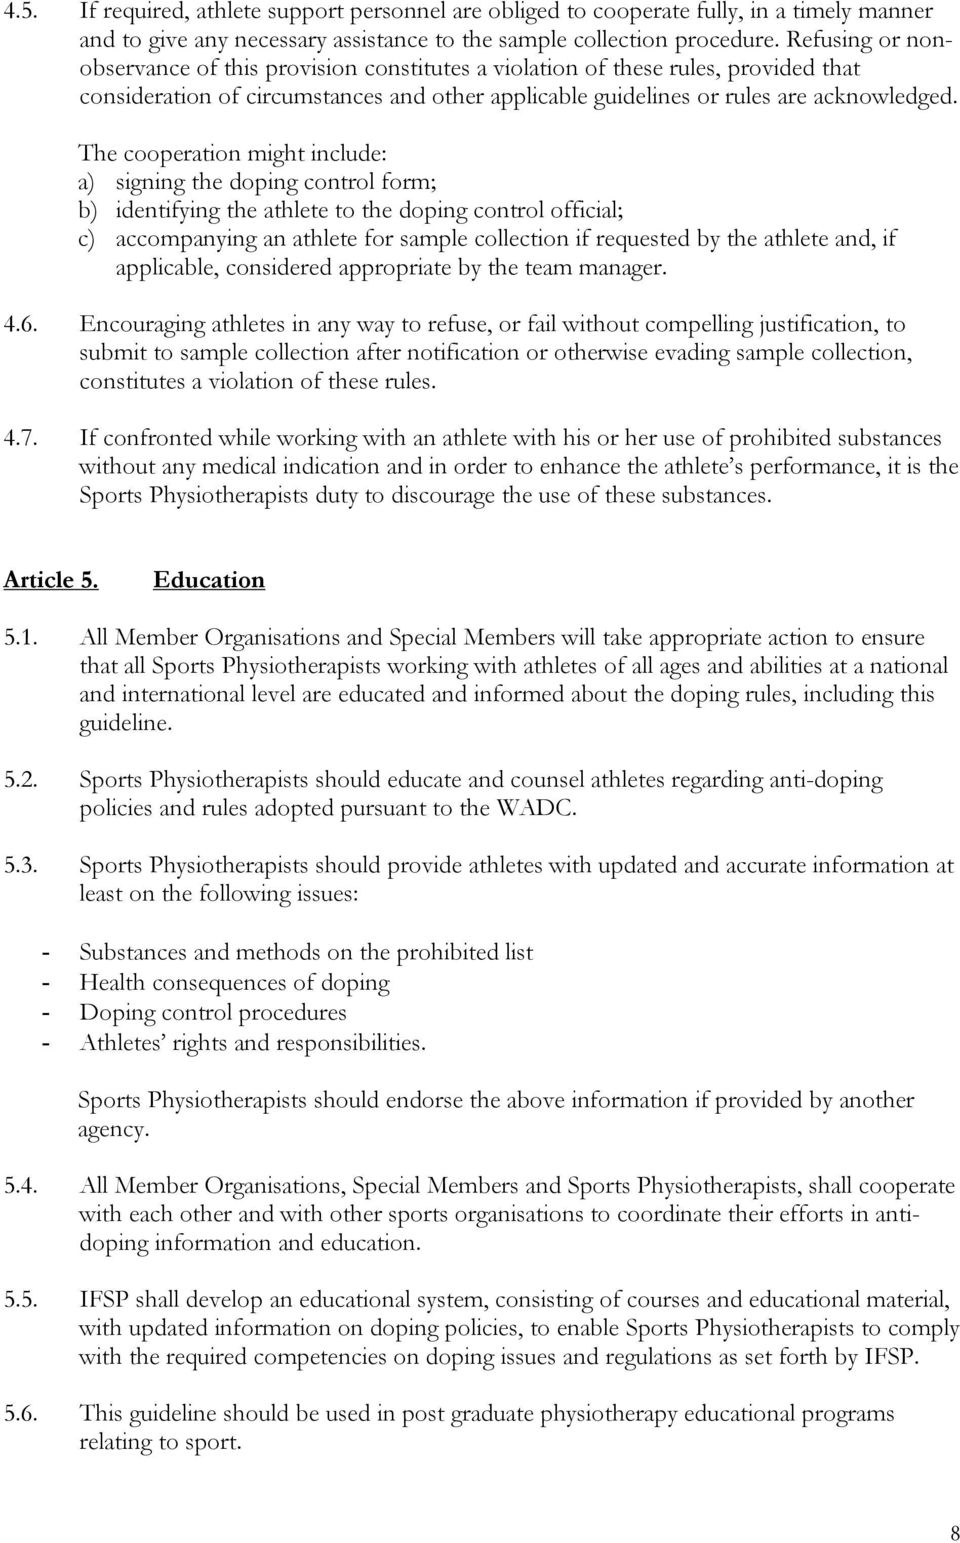 The cooperation might include: a) signing the doping control form; b) identifying the athlete to the doping control official; c) accompanying an athlete for sample collection if requested by the